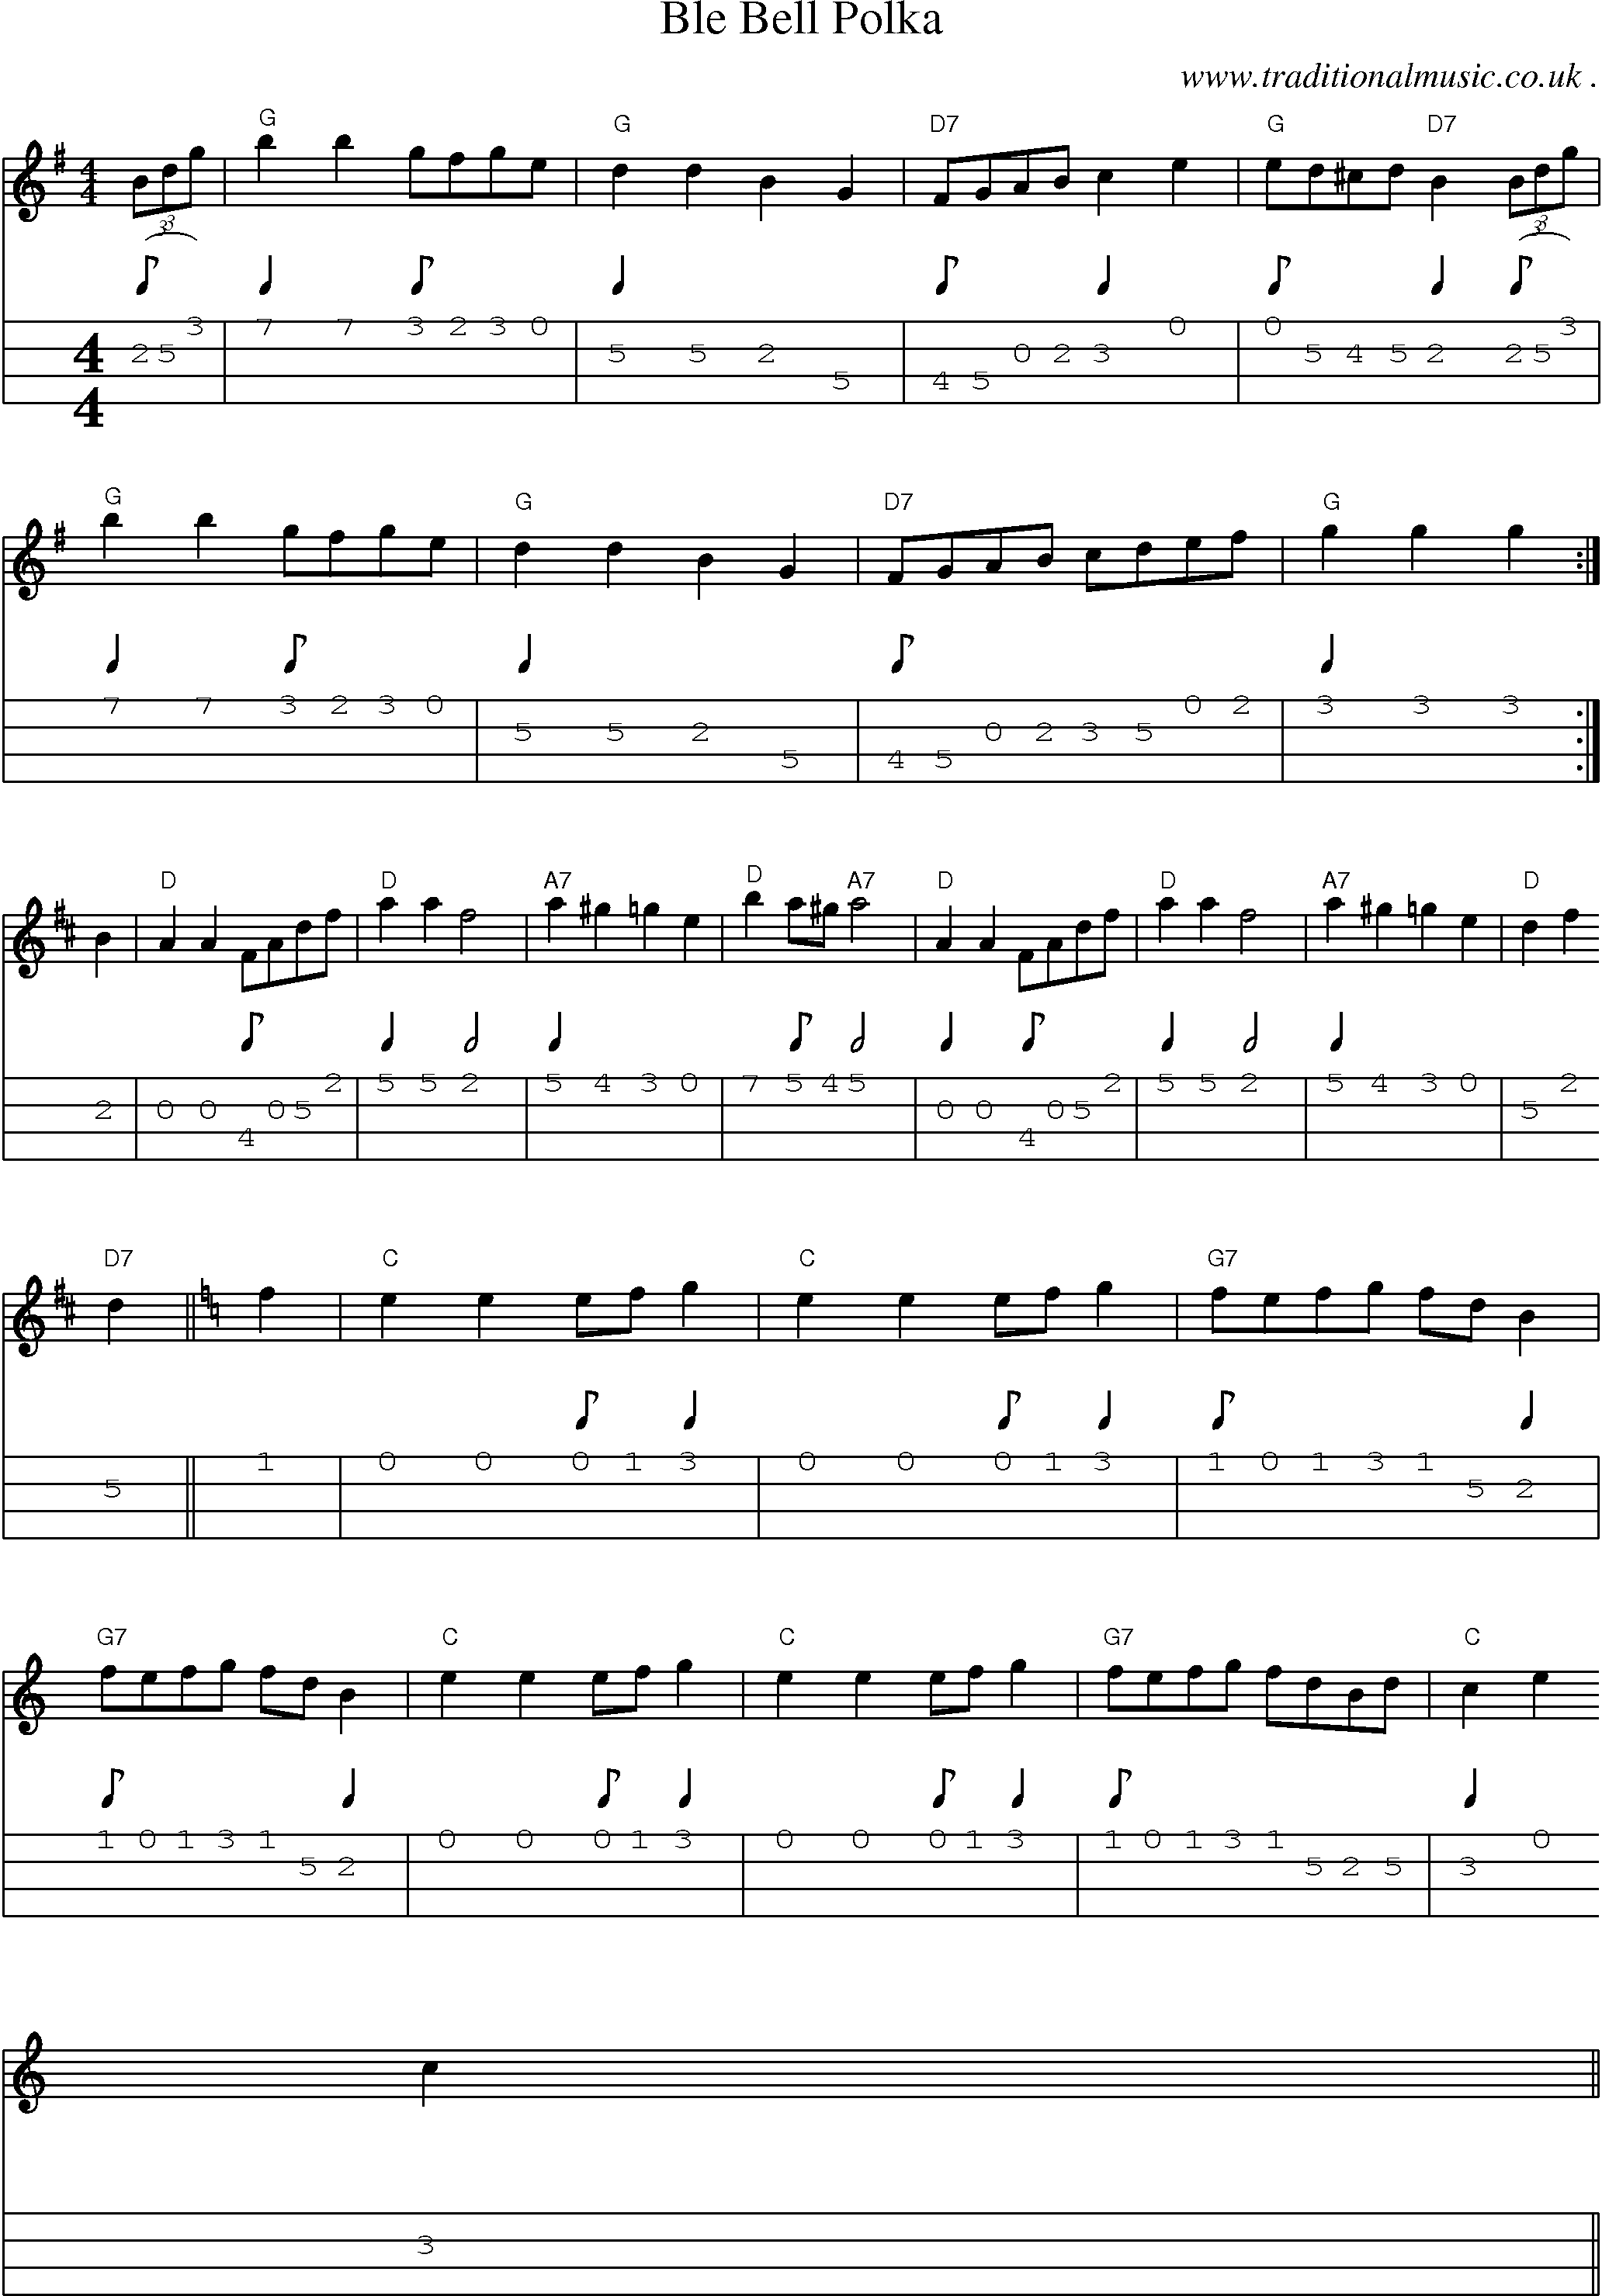 Sheet-Music and Mandolin Tabs for Ble Bell Polka